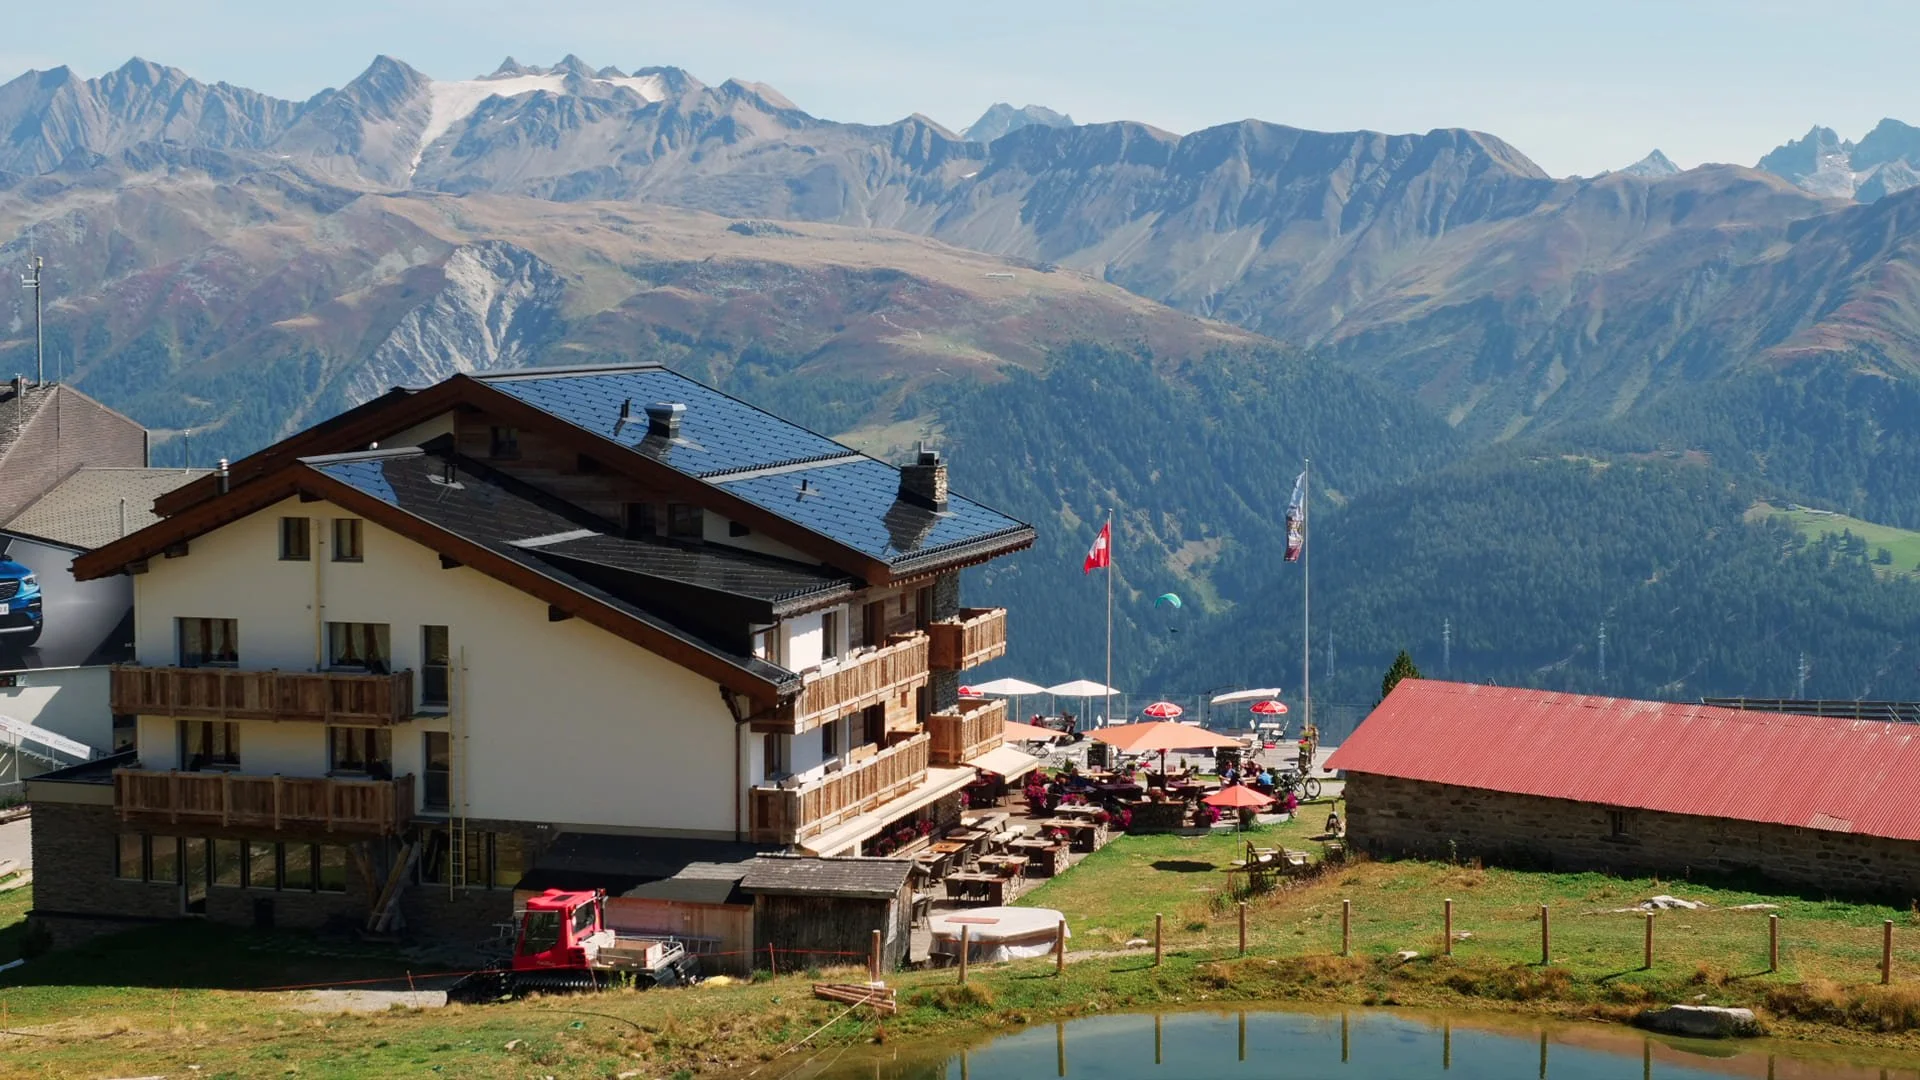 SunStyle Photovoltaic Solar Roof BIPV on multi-family residence in Swiss Alps